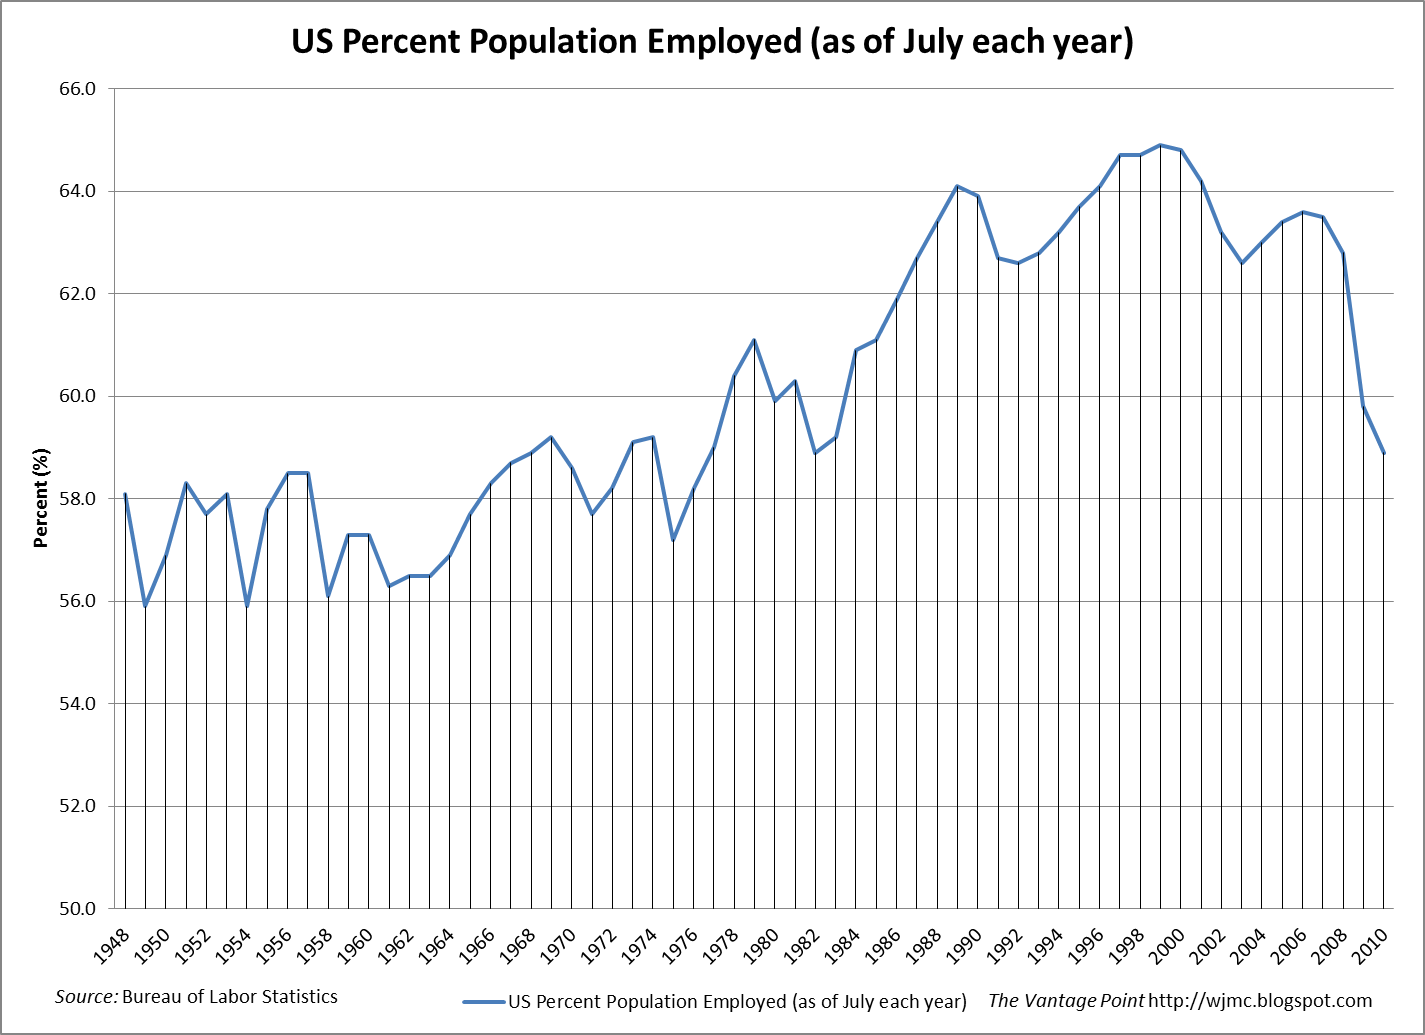 Percent+Population+Employed+7-2010.png